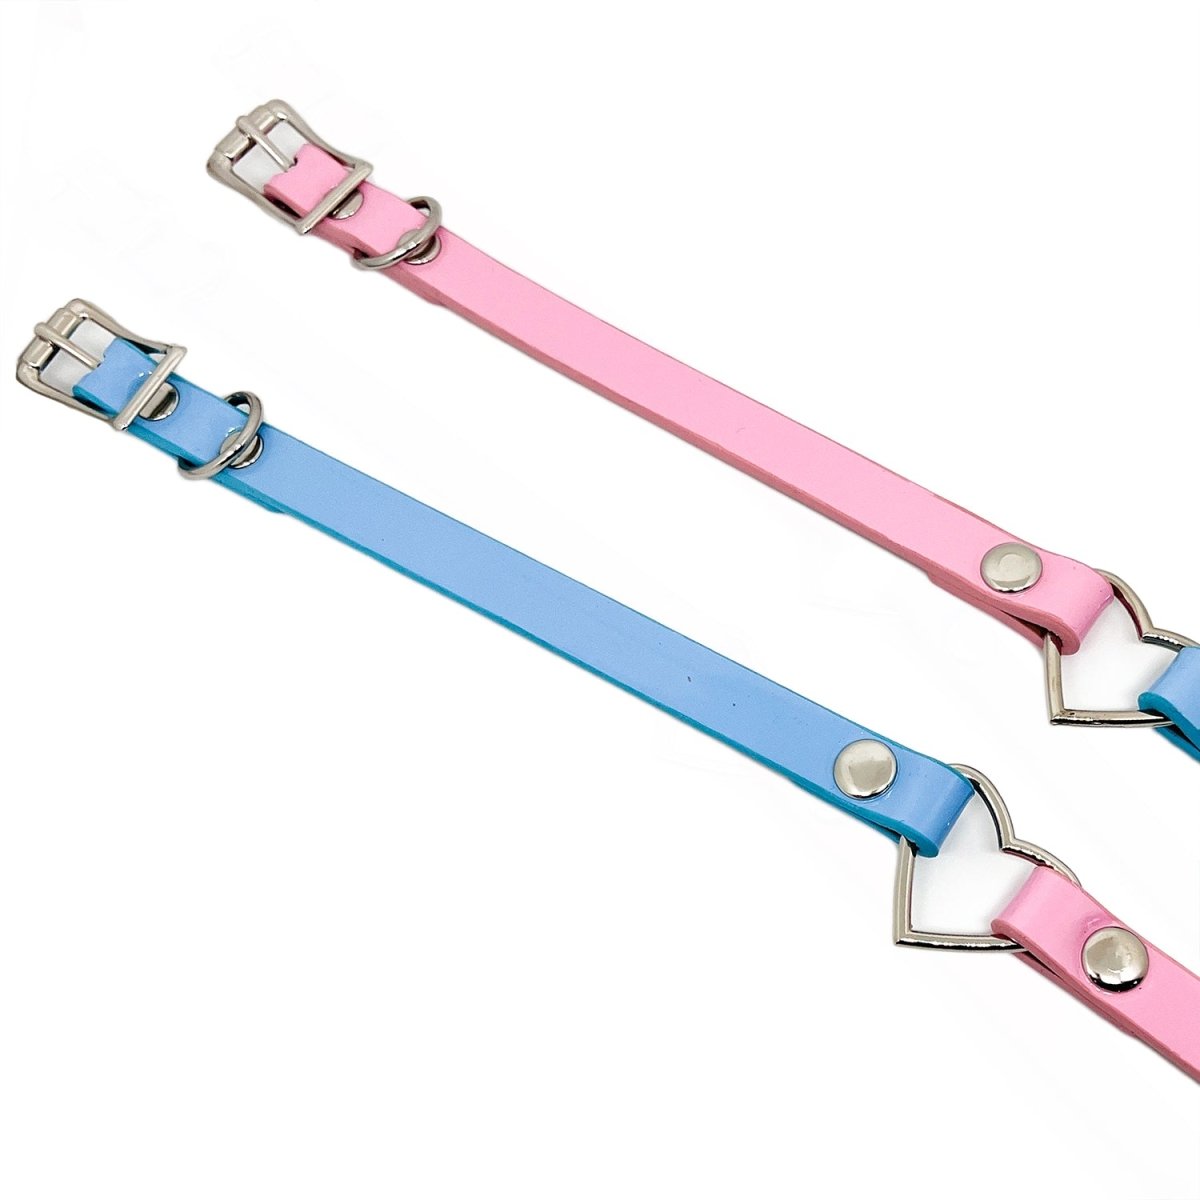 Too Fast | Funk Plus | Pastel Heart Choker Necklace